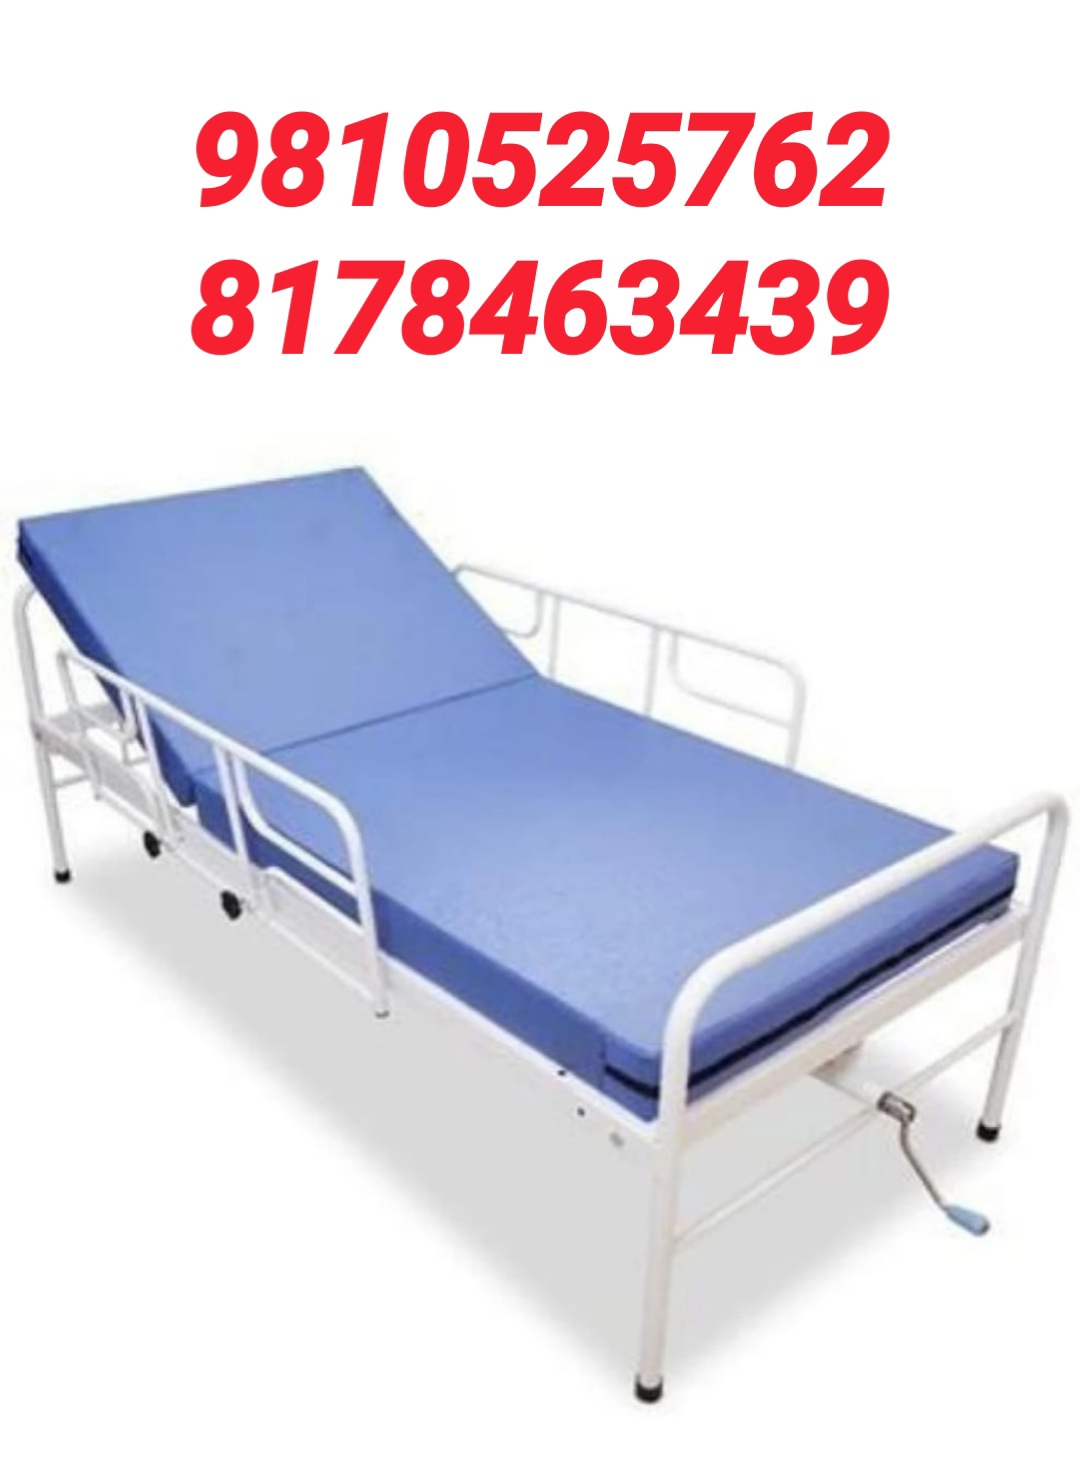 Hospital Bed on Rent Hire in Delhi 8178463439